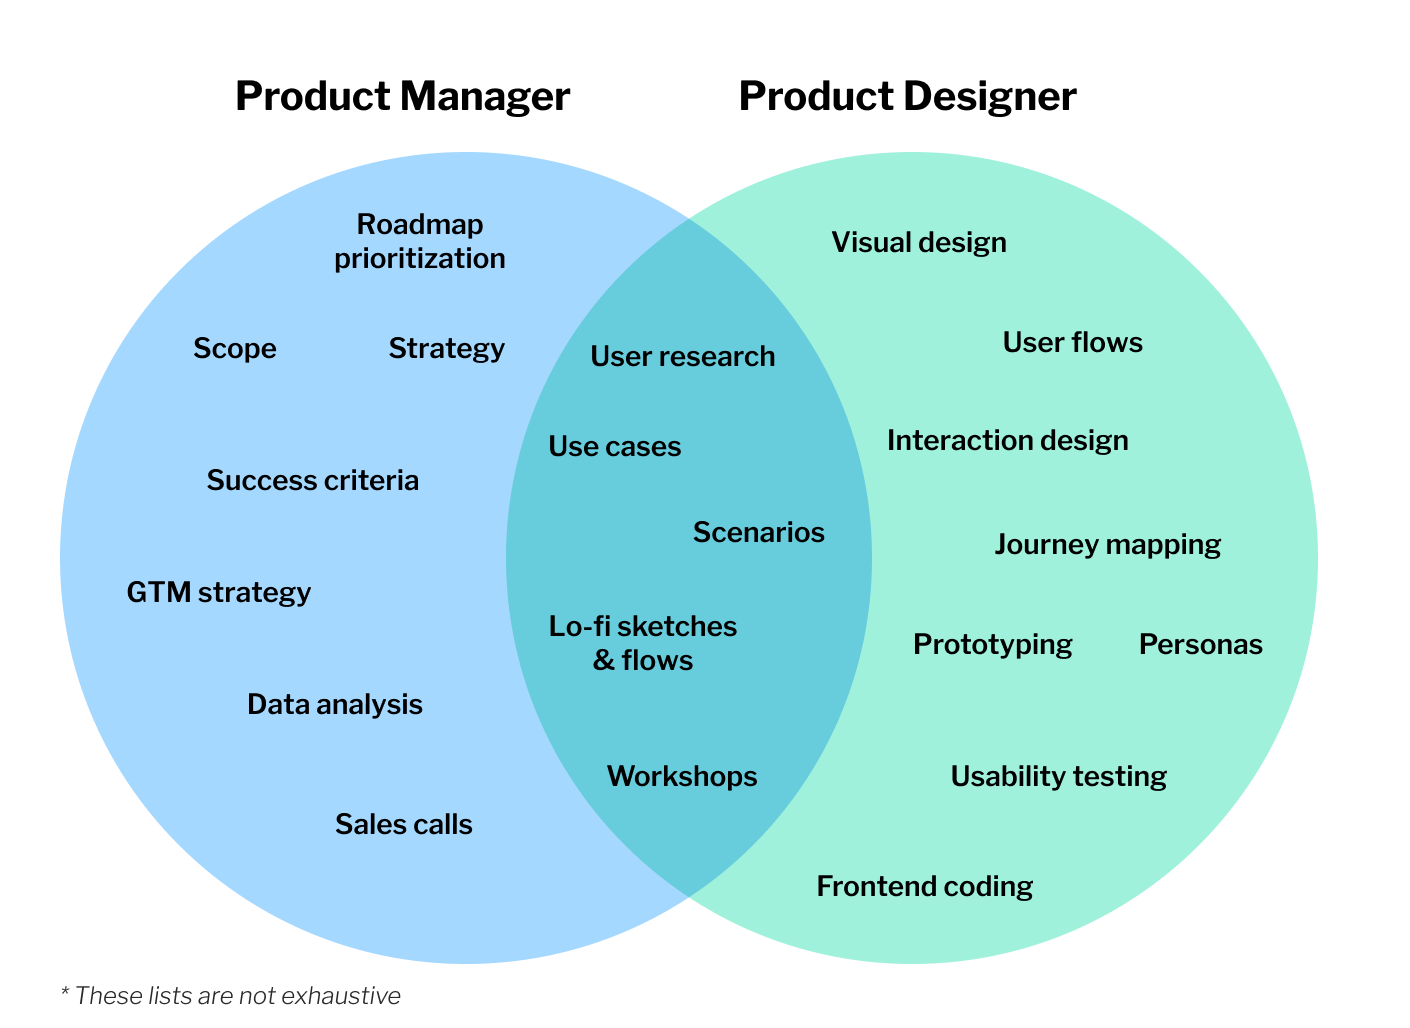 Venn diagram of the overlap between Product Managers and Product Designers